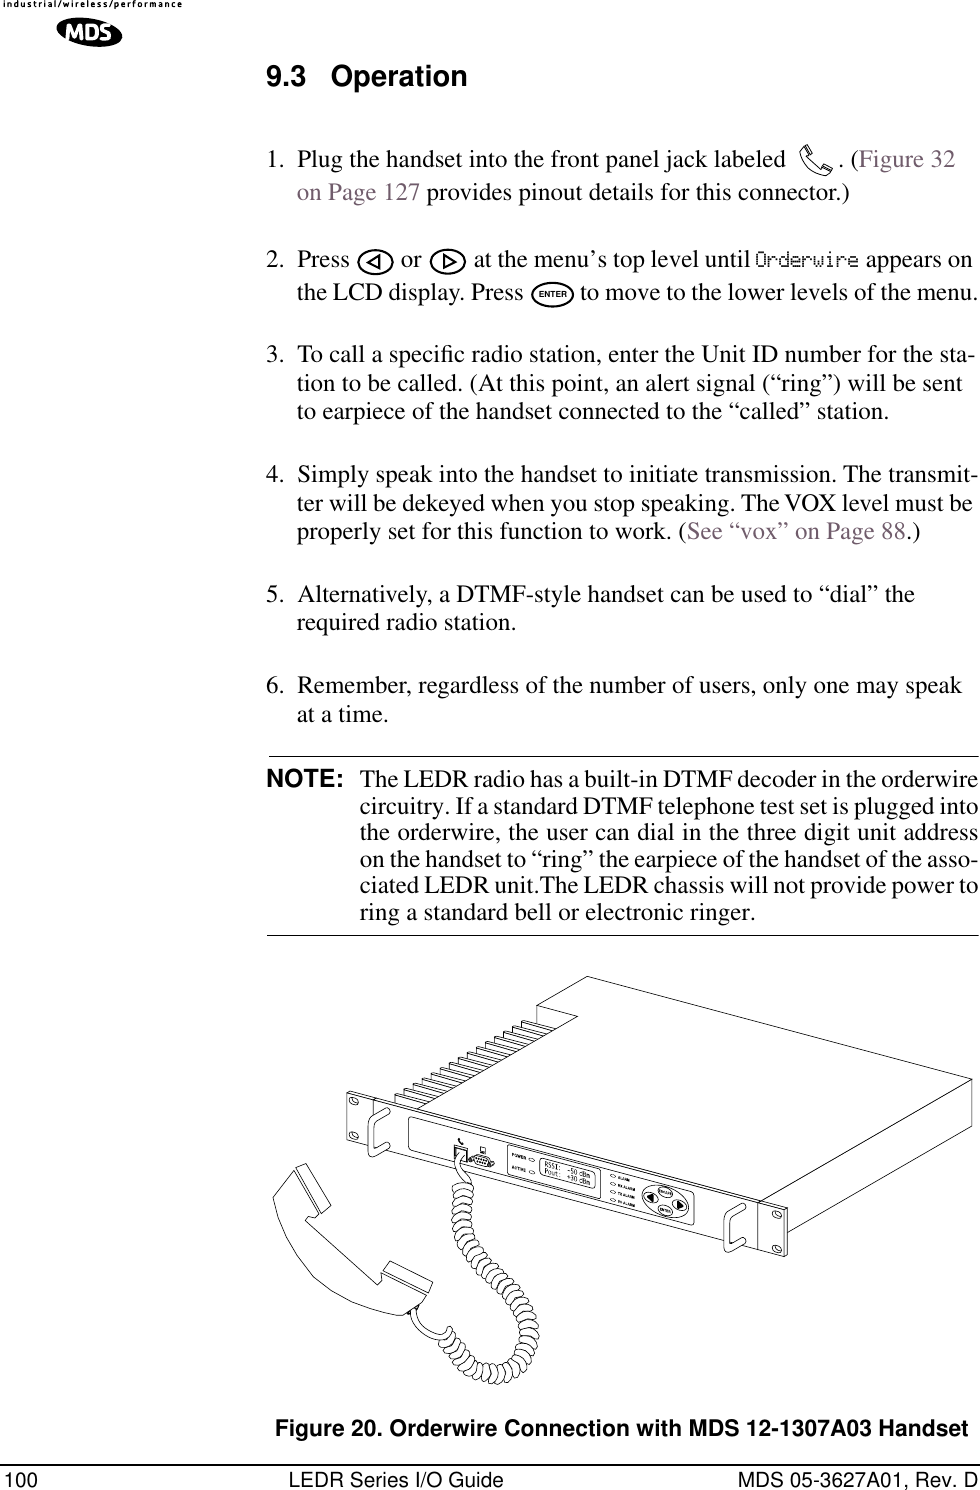 100 LEDR Series I/O Guide MDS 05-3627A01, Rev. D9.3 Operation1. Plug the handset into the front panel jack labeled  . (Figure 32 on Page 127 provides pinout details for this connector.)2. Press   or   at the menu’s top level until Orderwire appears on the LCD display. Press   to move to the lower levels of the menu.3. To call a speciﬁc radio station, enter the Unit ID number for the sta-tion to be called. (At this point, an alert signal (“ring”) will be sent to earpiece of the handset connected to the “called” station.4. Simply speak into the handset to initiate transmission. The transmit-ter will be dekeyed when you stop speaking. The VOX level must be properly set for this function to work. (See “vox” on Page 88.)5. Alternatively, a DTMF-style handset can be used to “dial” the required radio station.6. Remember, regardless of the number of users, only one may speak at a time.NOTE: The LEDR radio has a built-in DTMF decoder in the orderwirecircuitry. If a standard DTMF telephone test set is plugged intothe orderwire, the user can dial in the three digit unit addresson the handset to “ring” the earpiece of the handset of the asso-ciated LEDR unit.The LEDR chassis will not provide power toring a standard bell or electronic ringer.Invisible place holderFigure 20. Orderwire Connection with MDS 12-1307A03 HandsetENTER